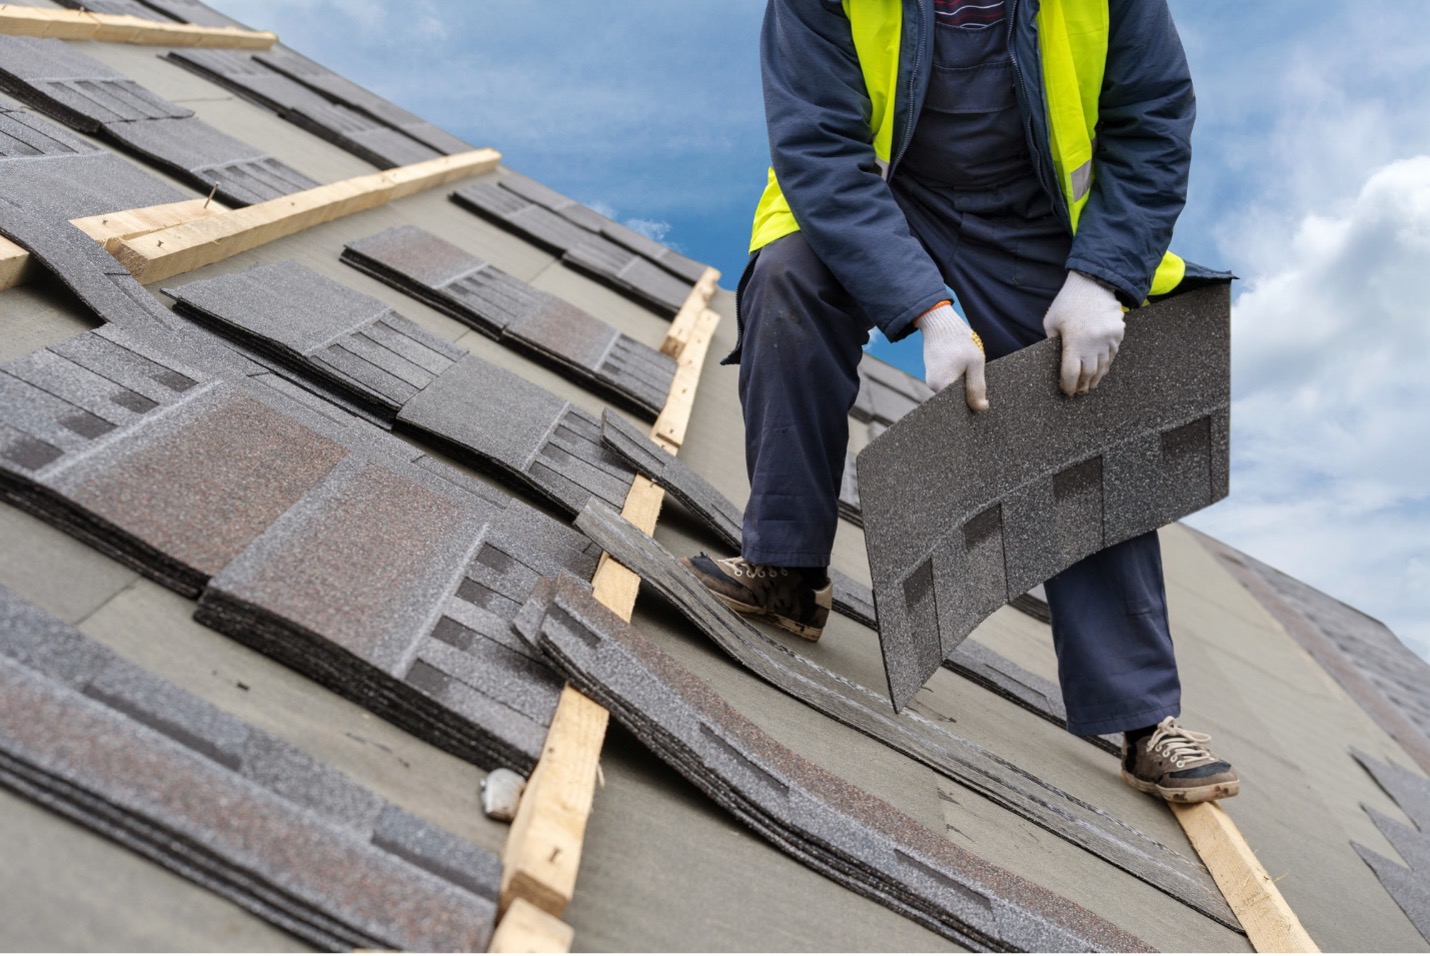 Real Estate Developers Rely on Expert Roofing Services for Smooth Project Execution